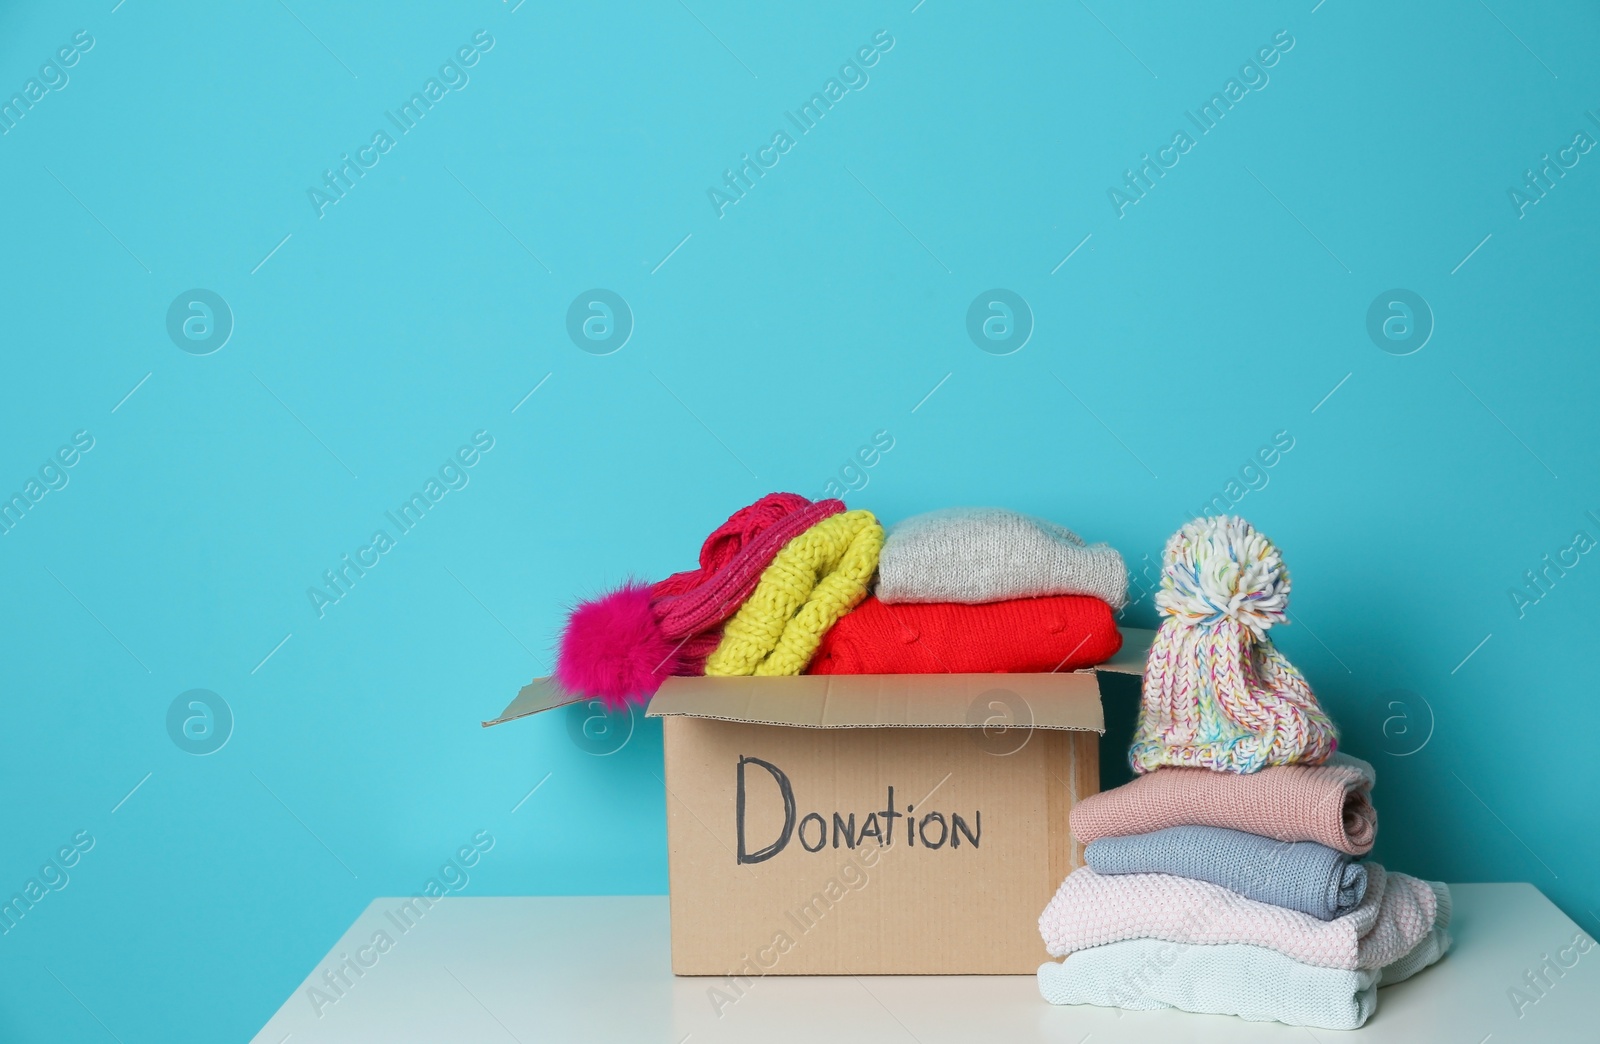 Photo of Donation box and knitted clothes on table against color background. Space for text